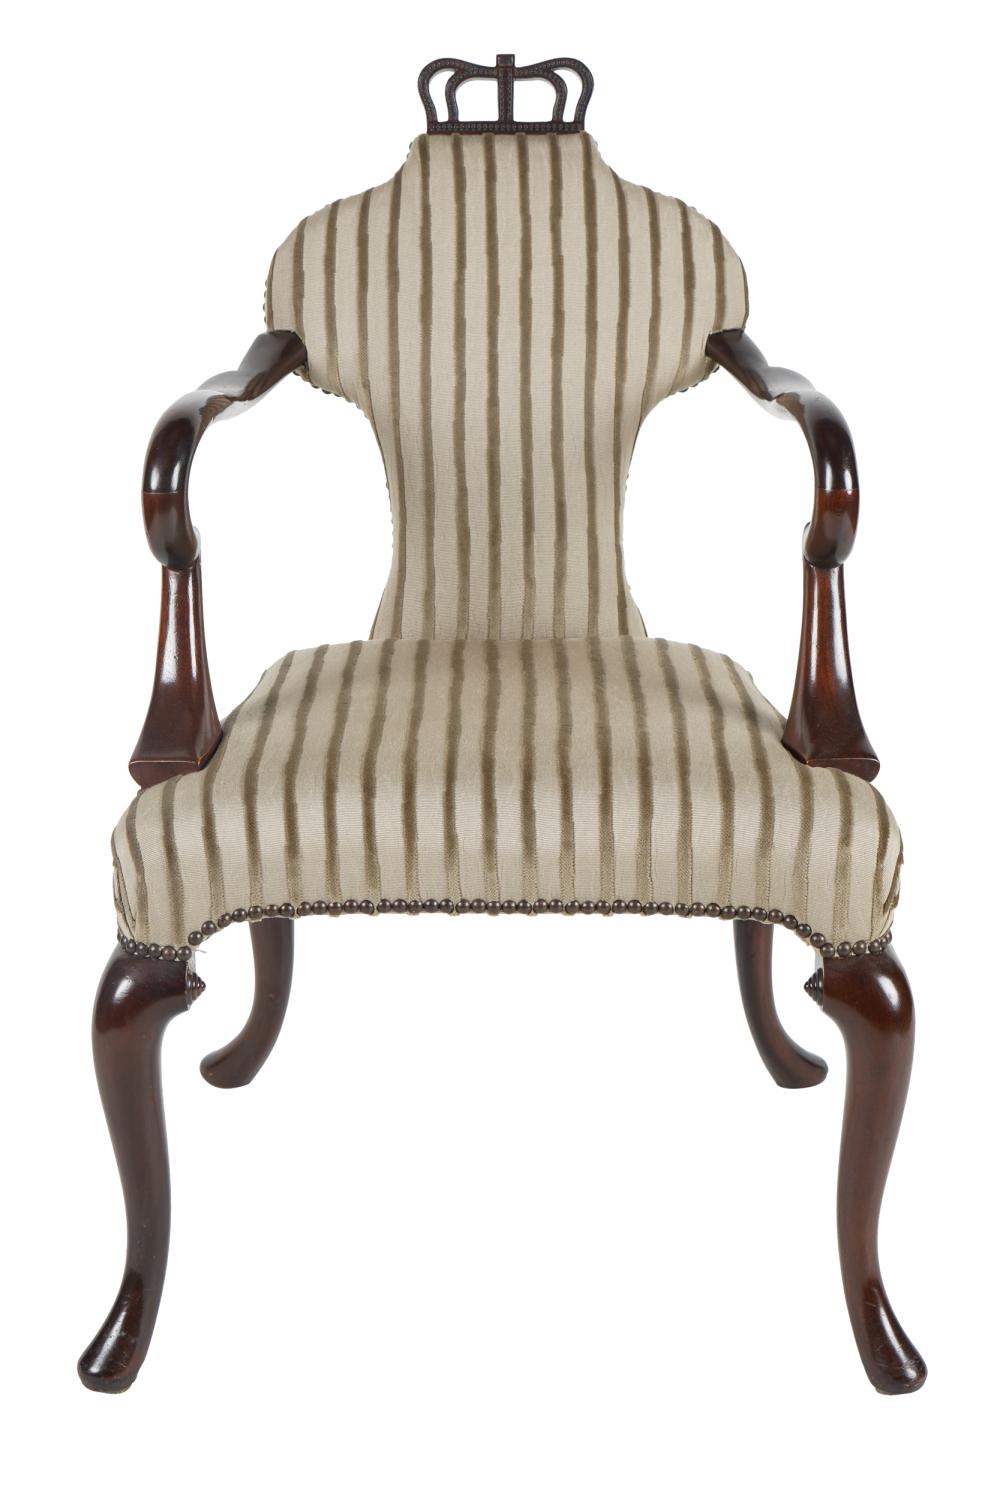 GEORGIAN STYLE MAHOGANY OPEN ARMCHAIRwith 332cab